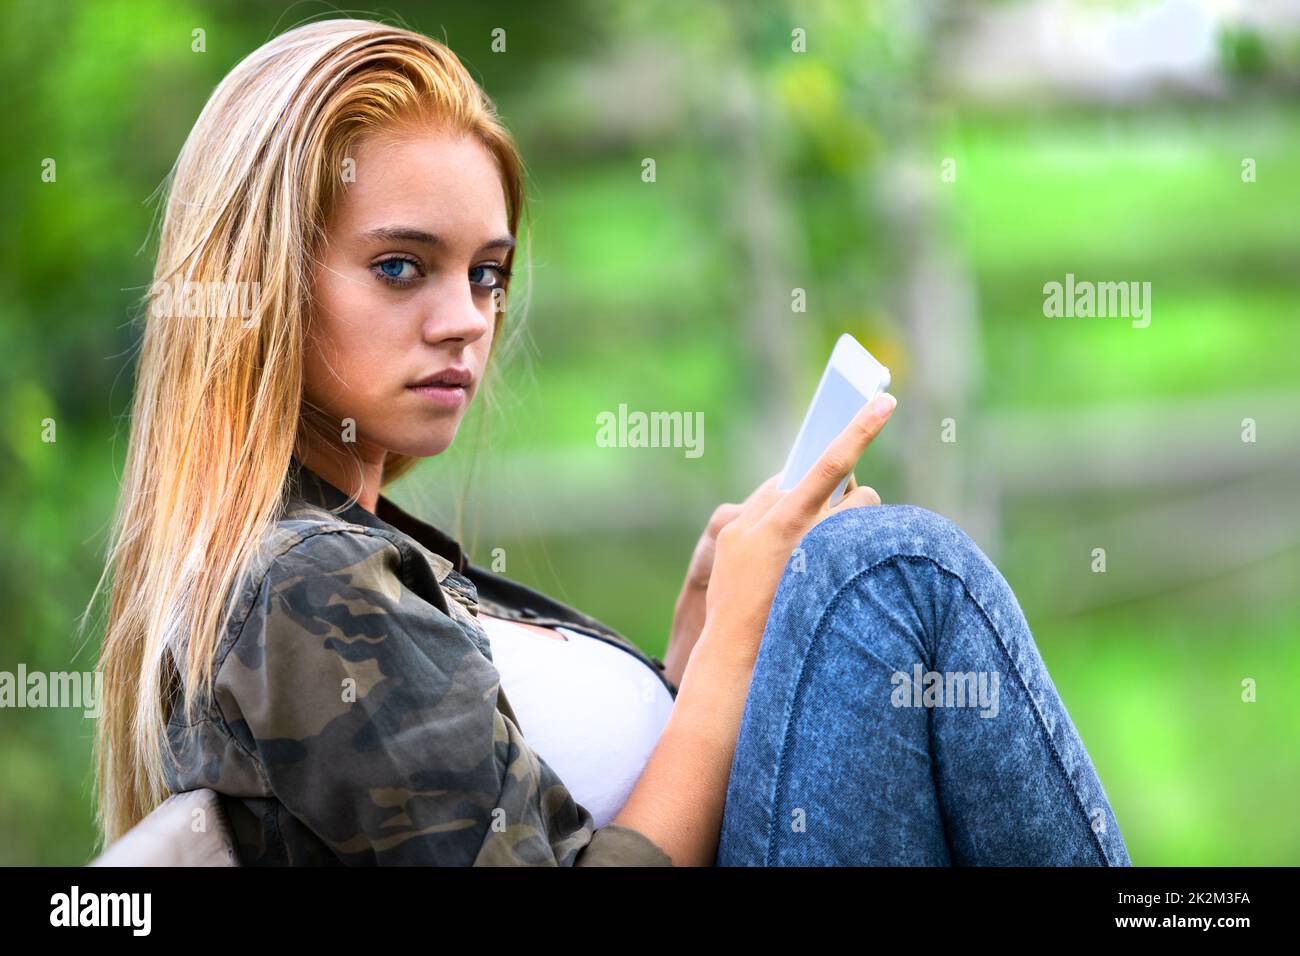 Sultry serious young woman looking aside at camera Stock Photo